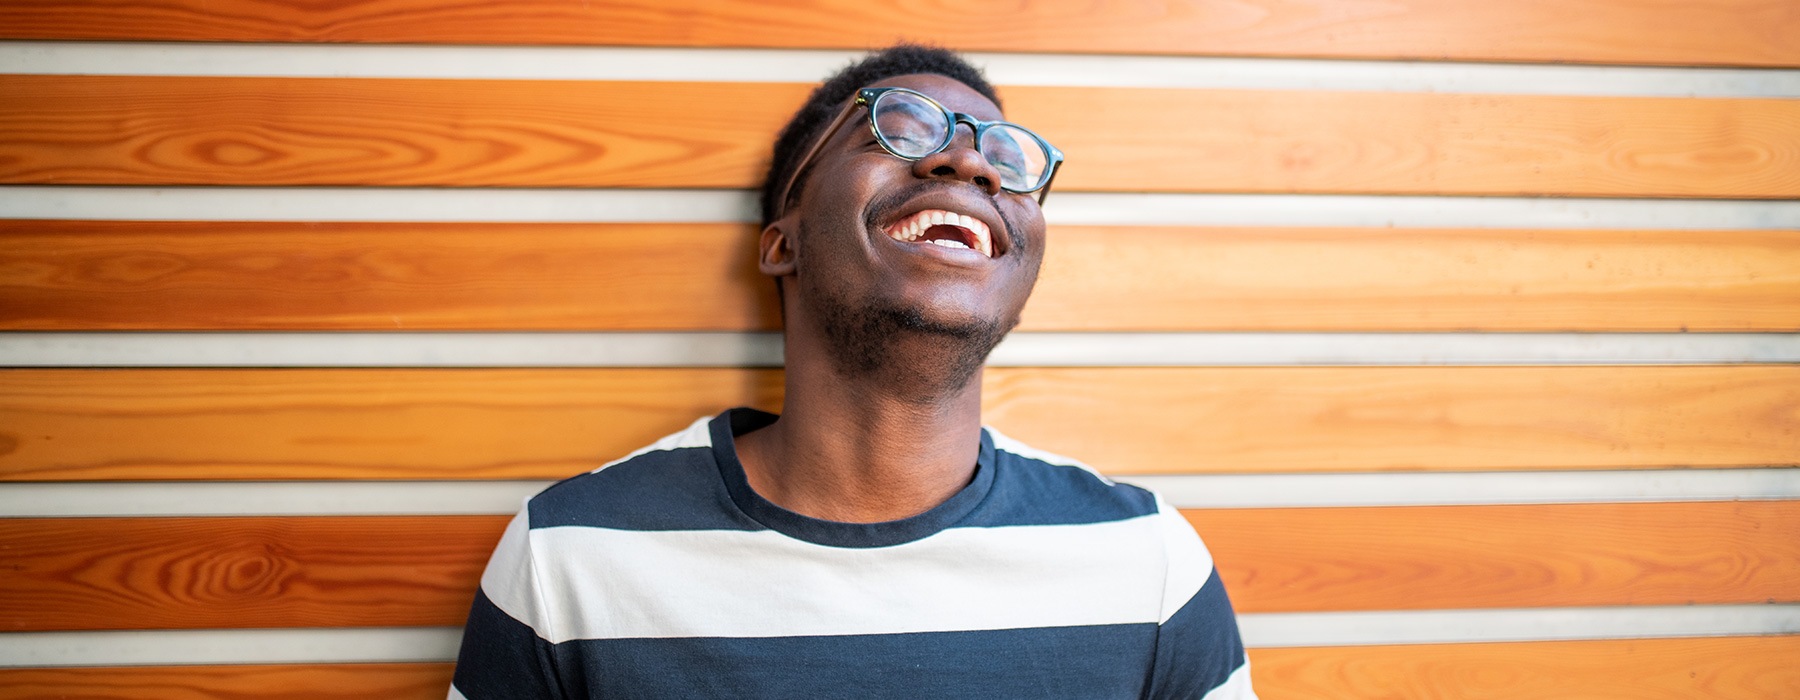 lifestyle image of a man laughing in front of a wooden accented wall